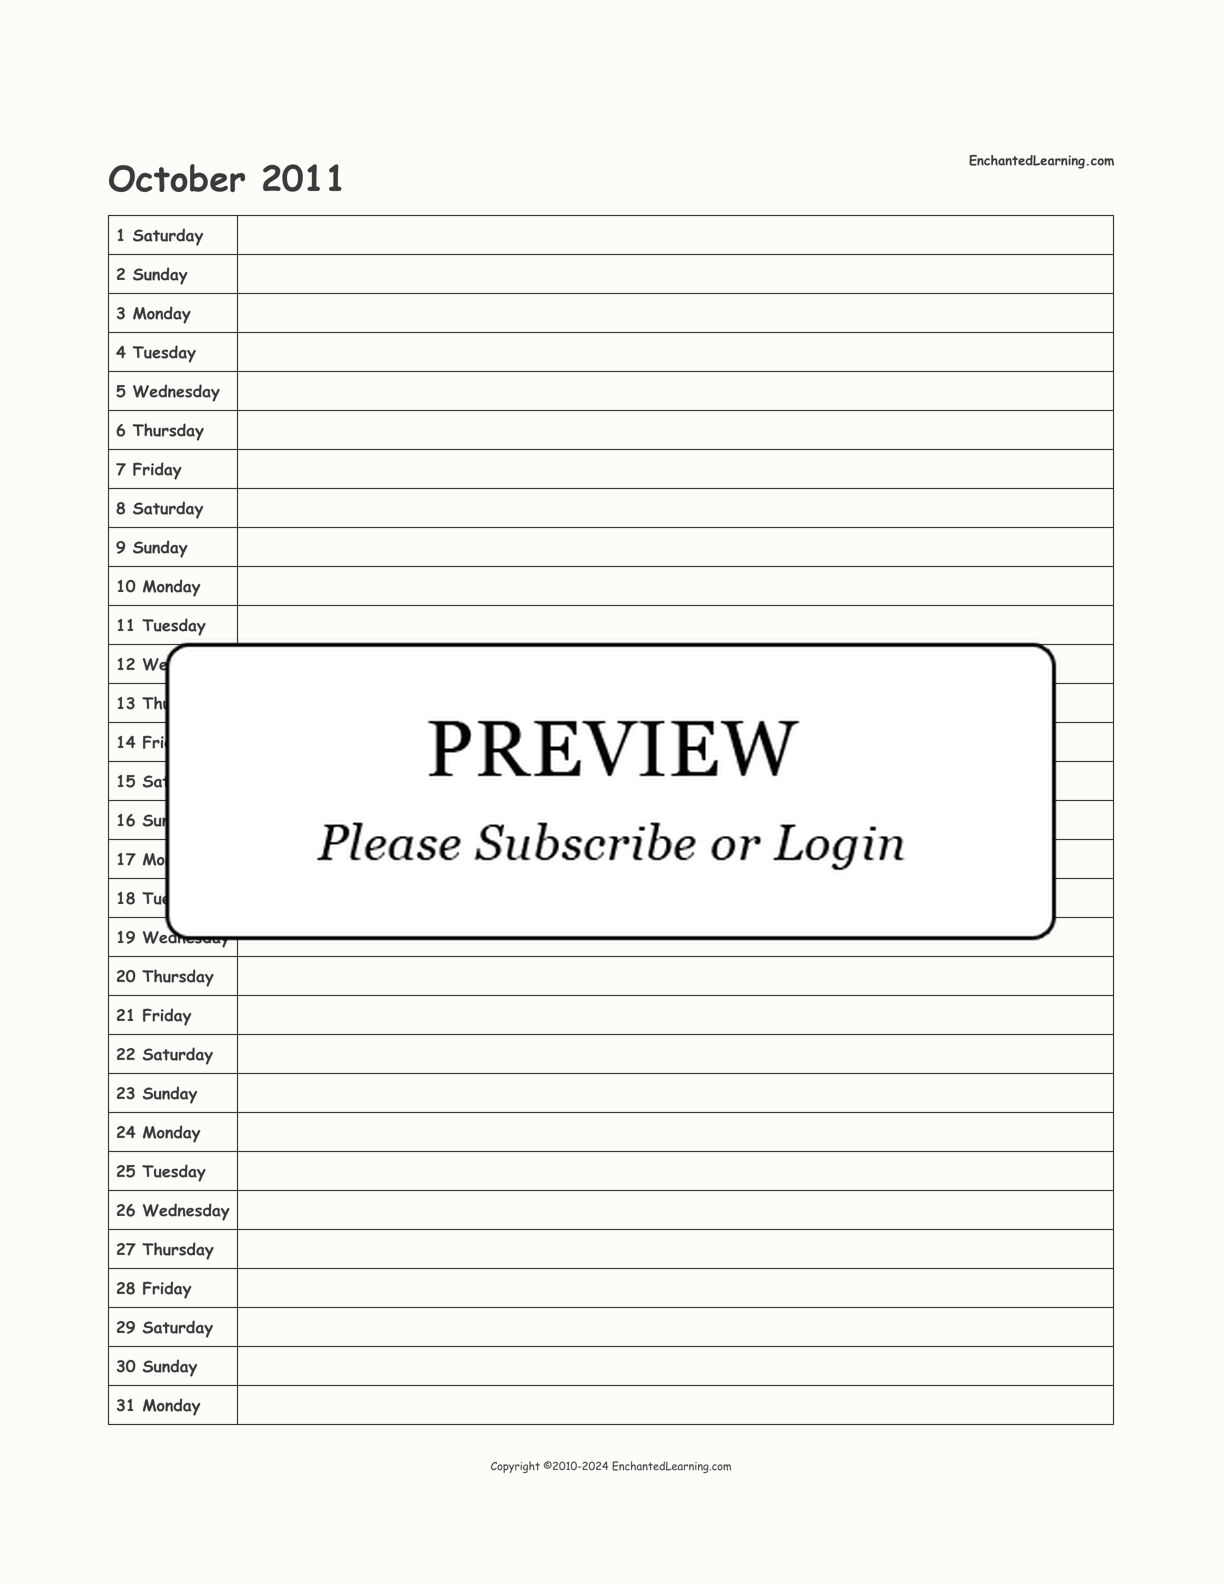 2011 Scheduling Calendar interactive printout page 10